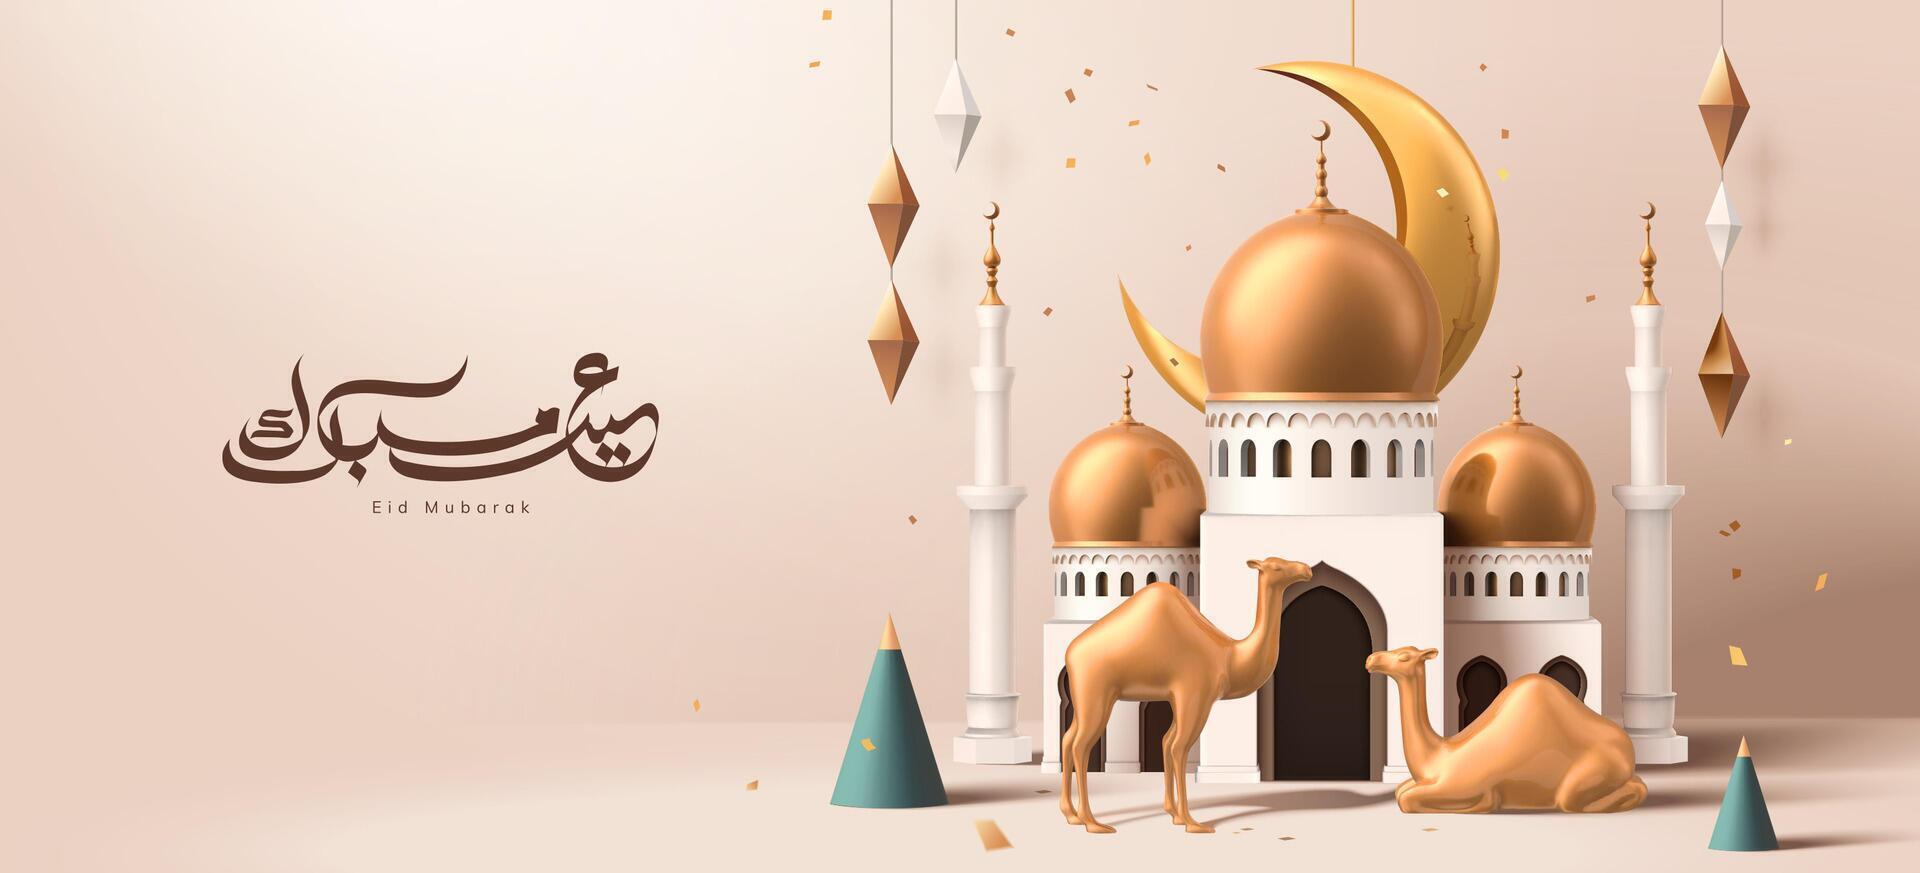 Elegant Ramadan celebration banner with crescent moon hidden behind mosque and Arabic calligraphy Eid Mubarak aside, meaning happy holiday, 3d illustration vector